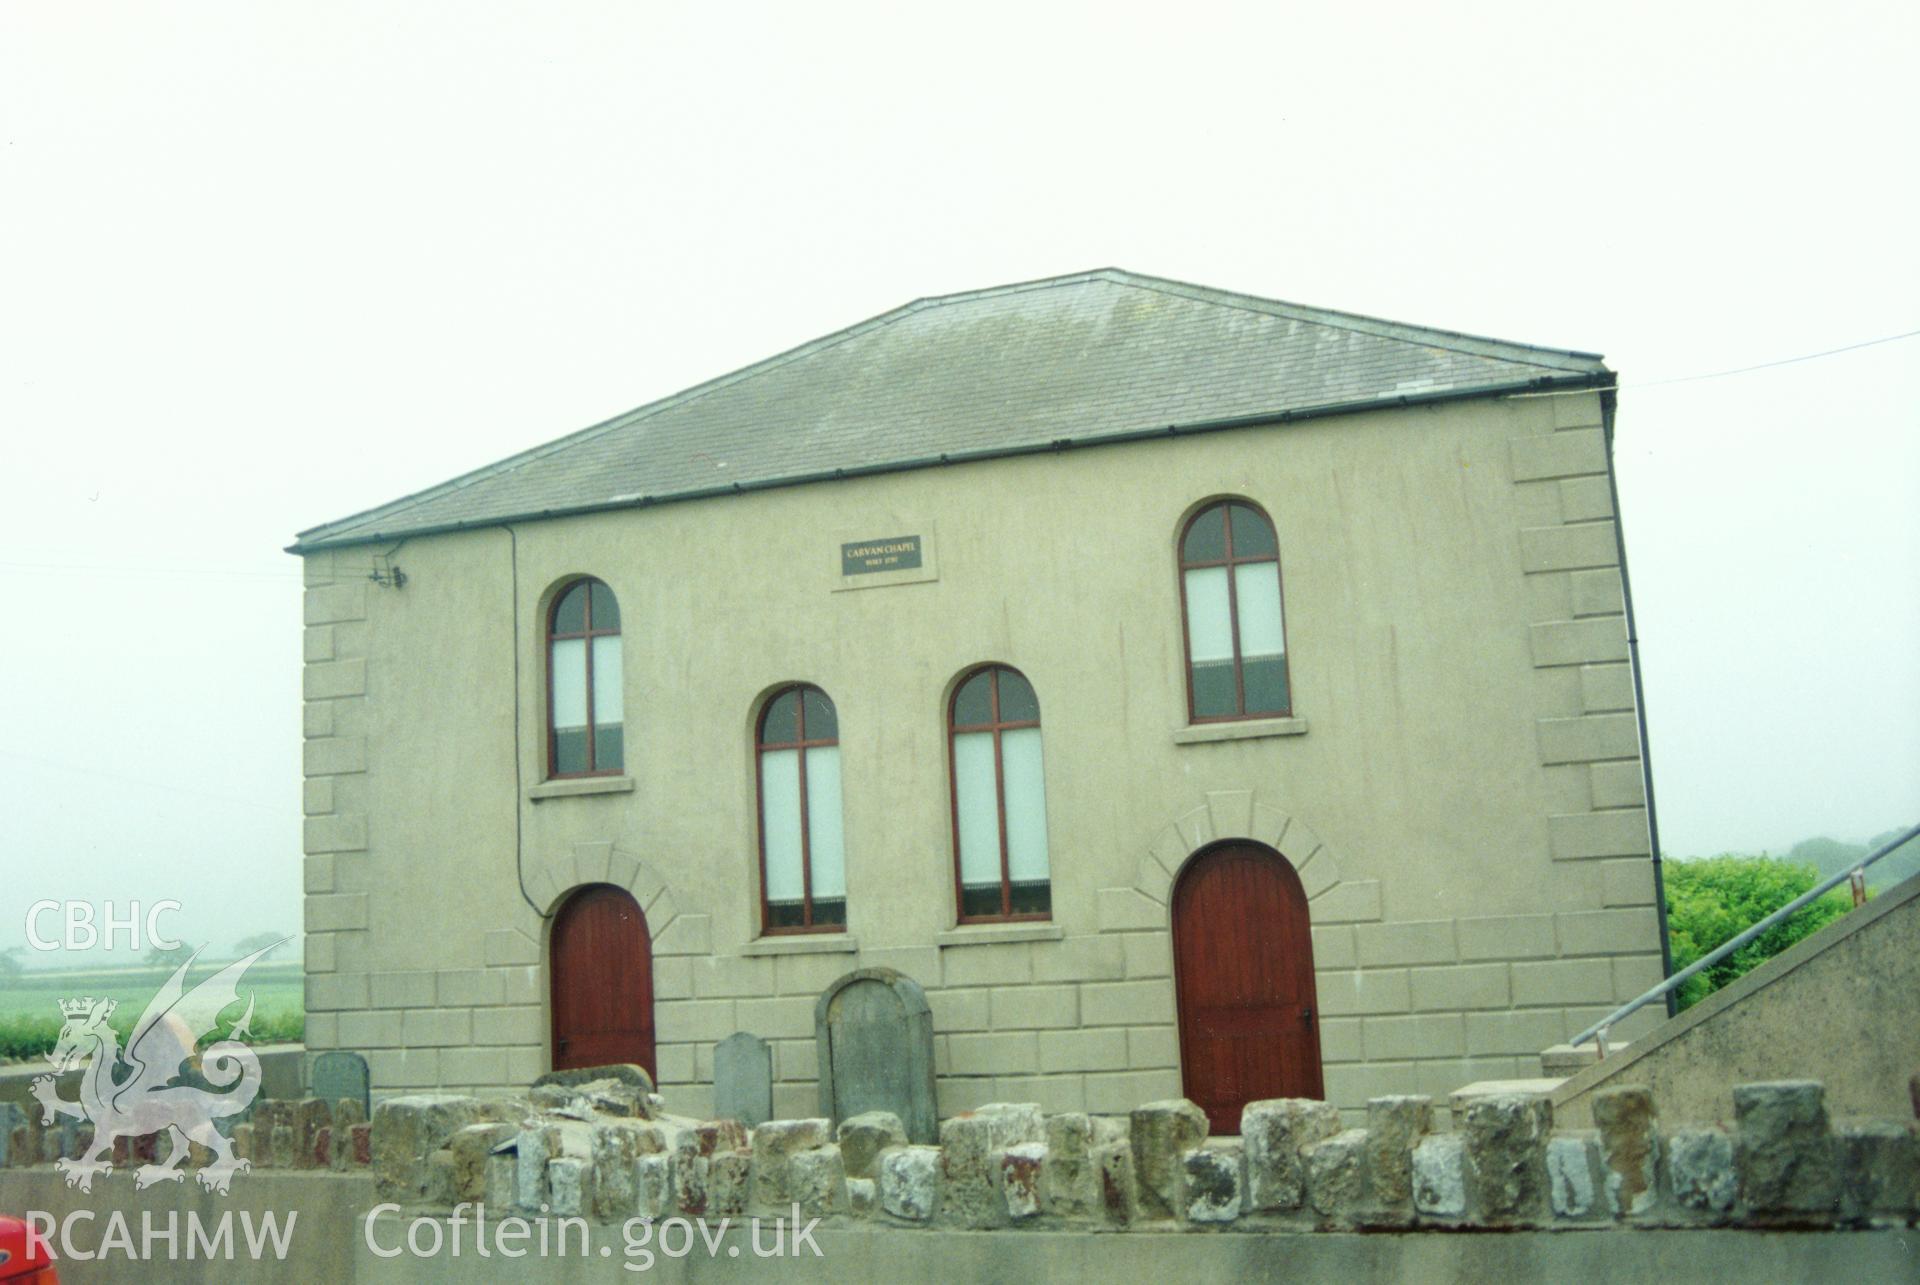 Digital copy of a colour photograph showing an exterior view of Carvan Independent Chapel, Lampeter Velfrey, taken by Robert Scourfield, 1996.